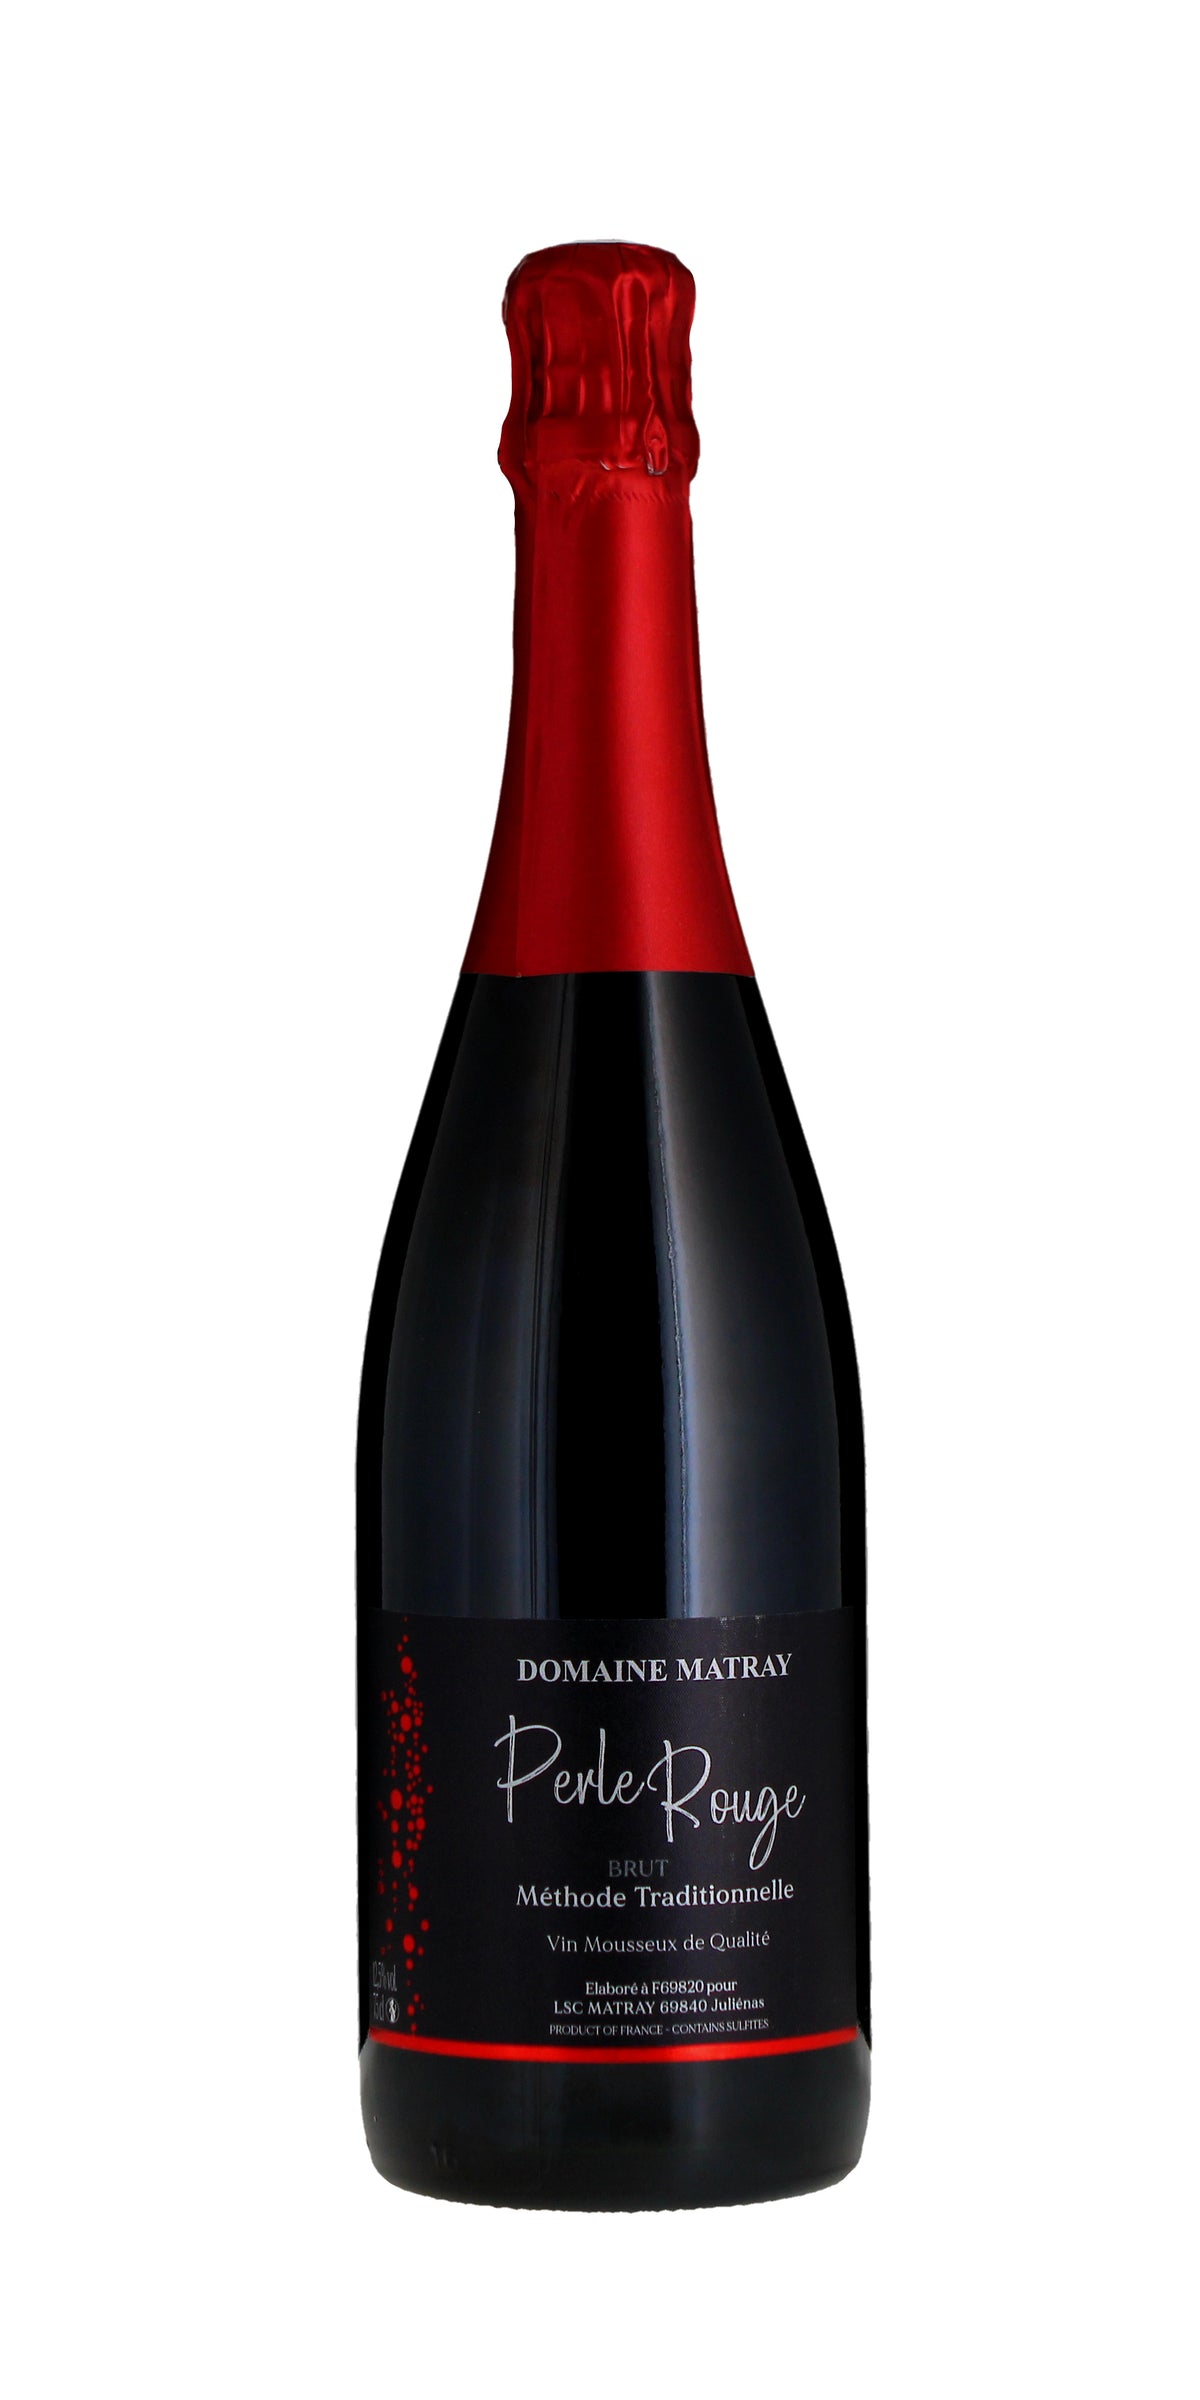 Domaine Matray, Perle Rouge, Methode Traditionnelle NV